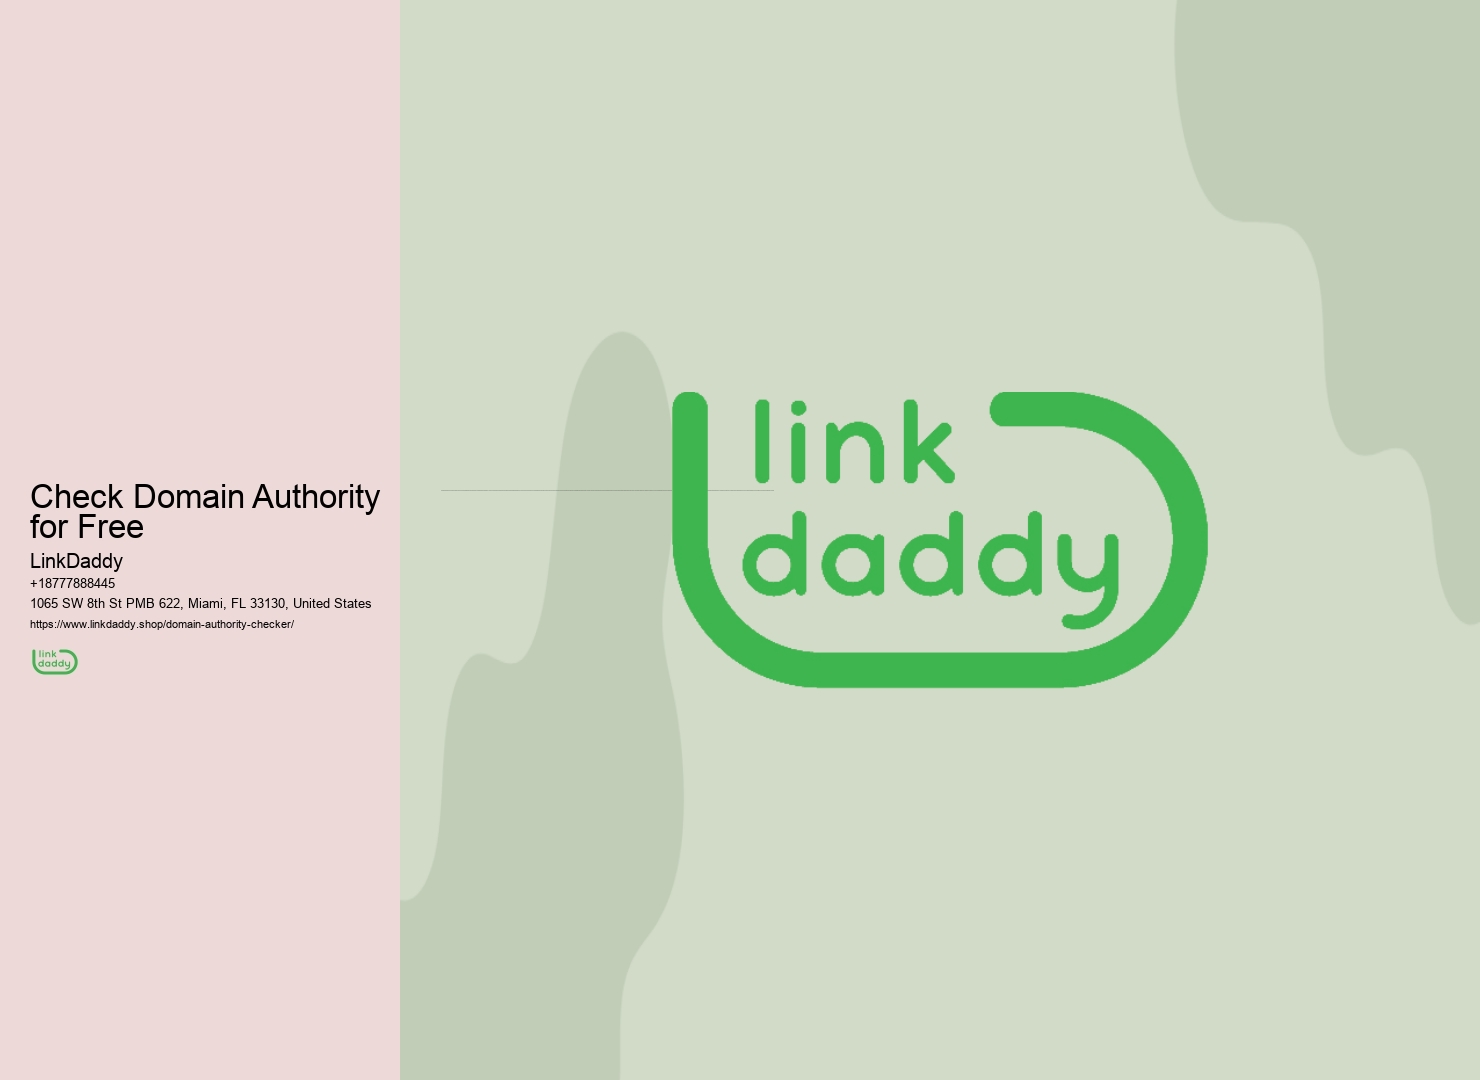 Check Domain Authority for Free